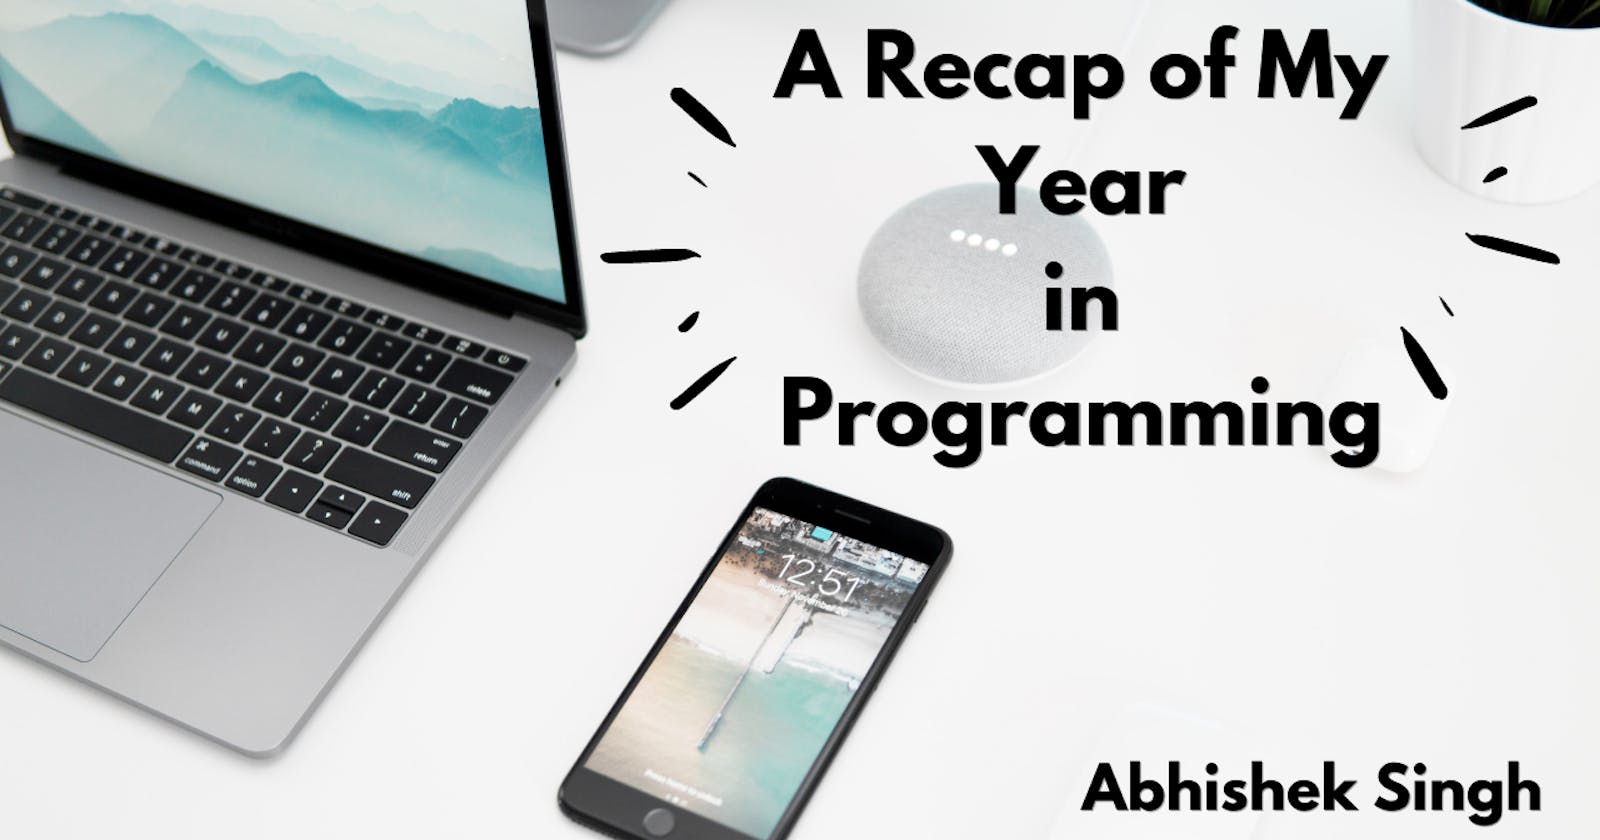 2022 Wrap: A Recap of My Year in Programming